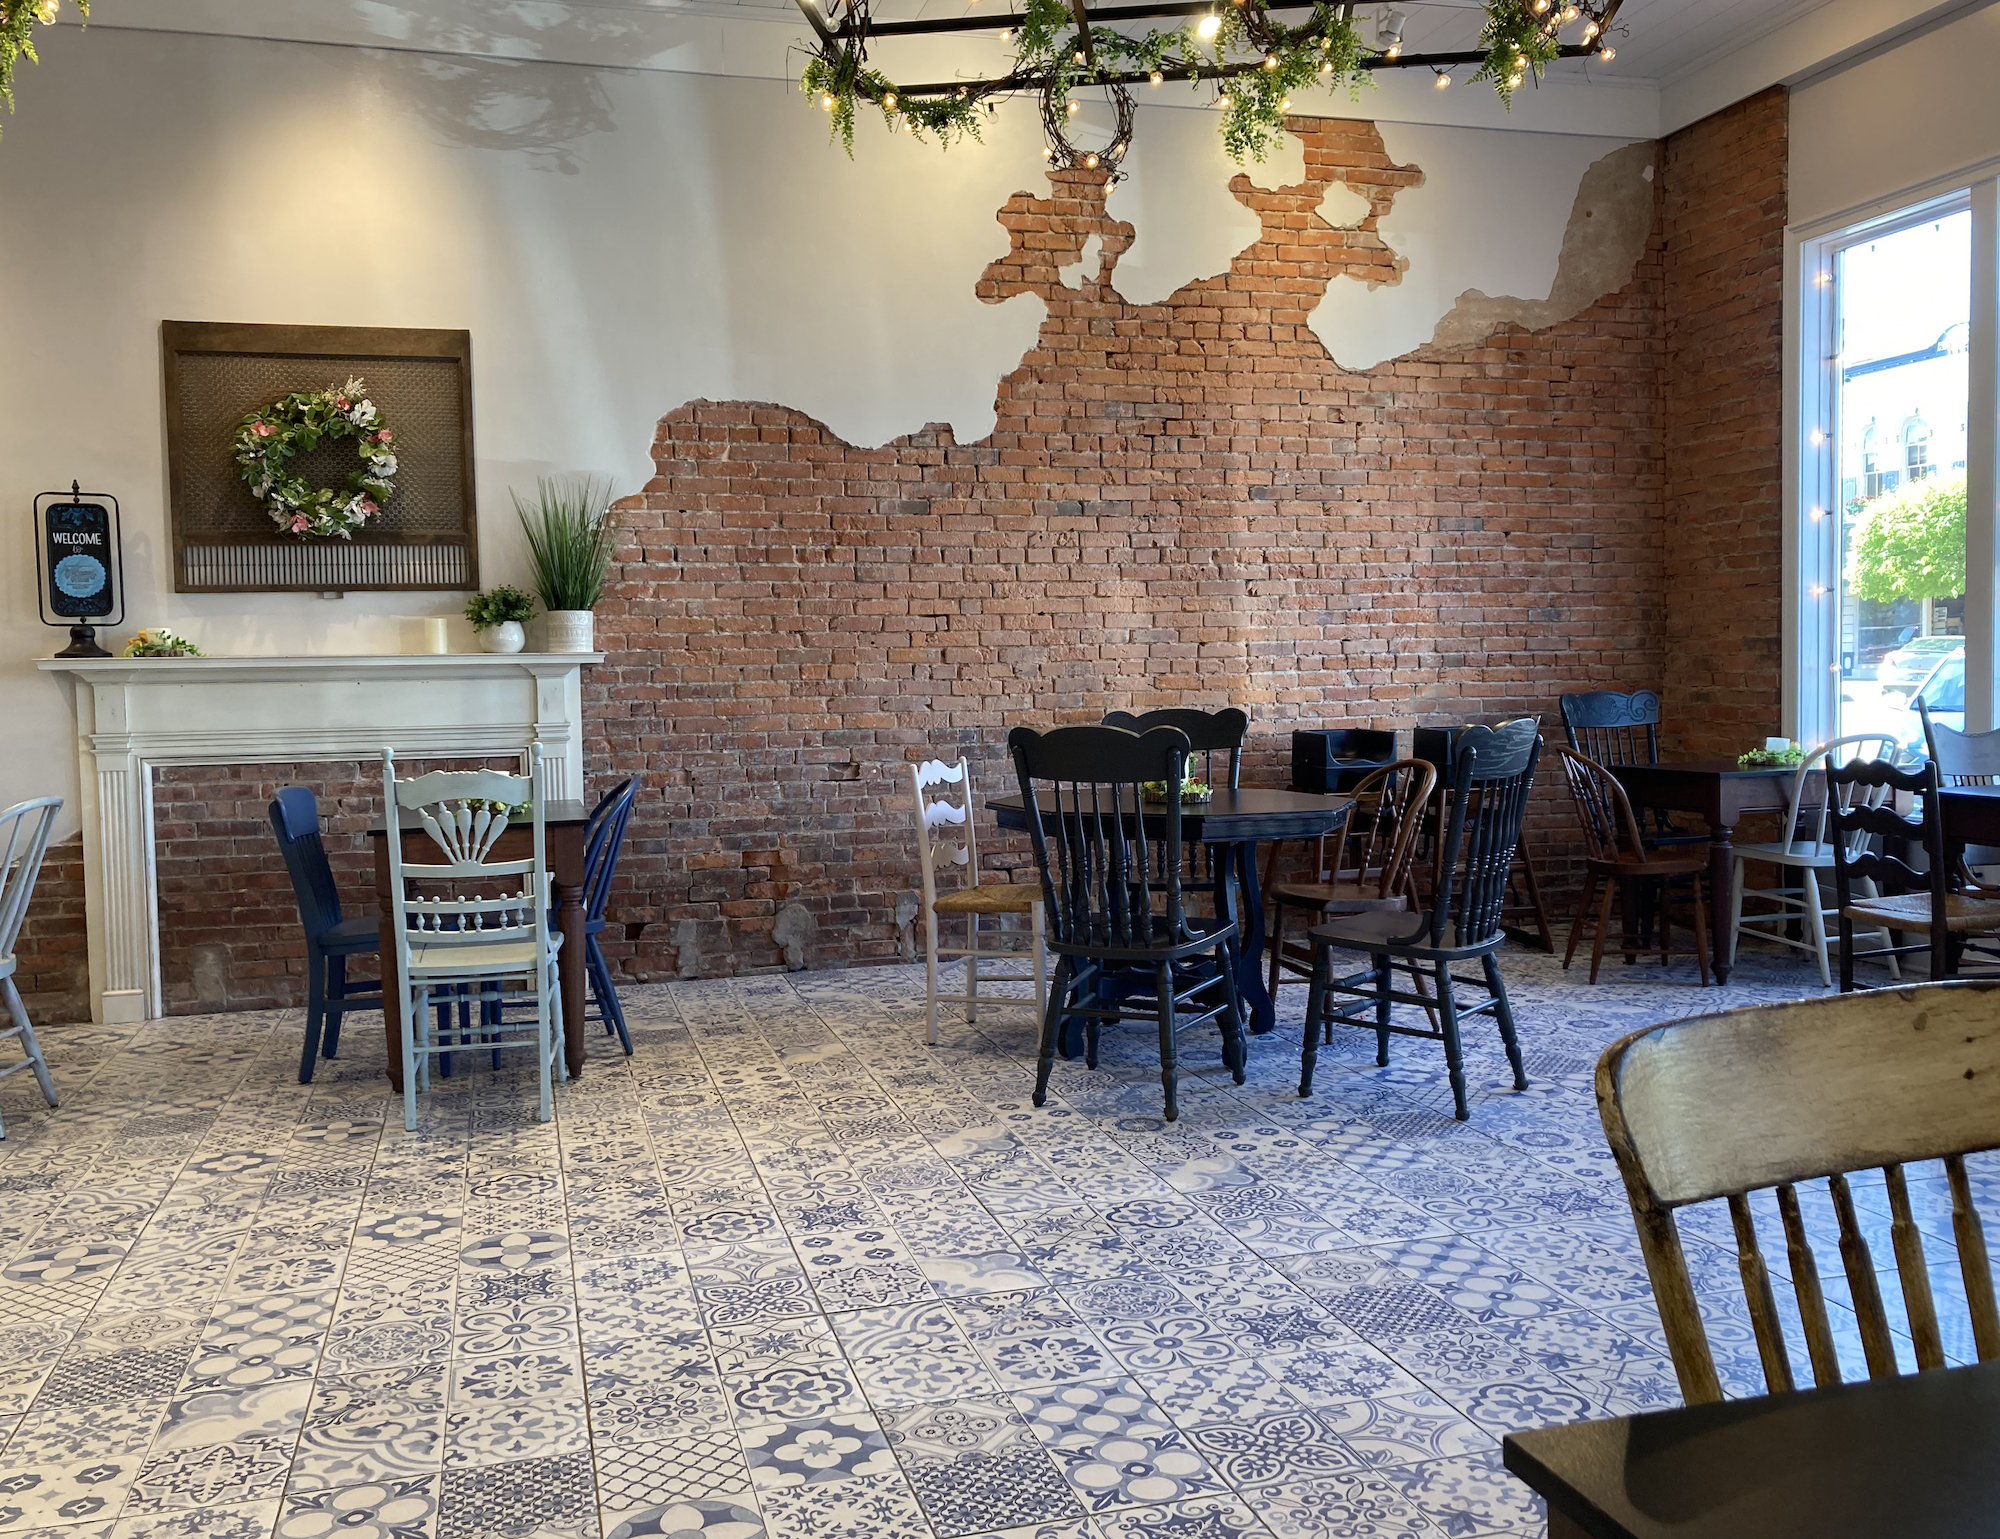 exposed brick wall and delft tile look floor tile